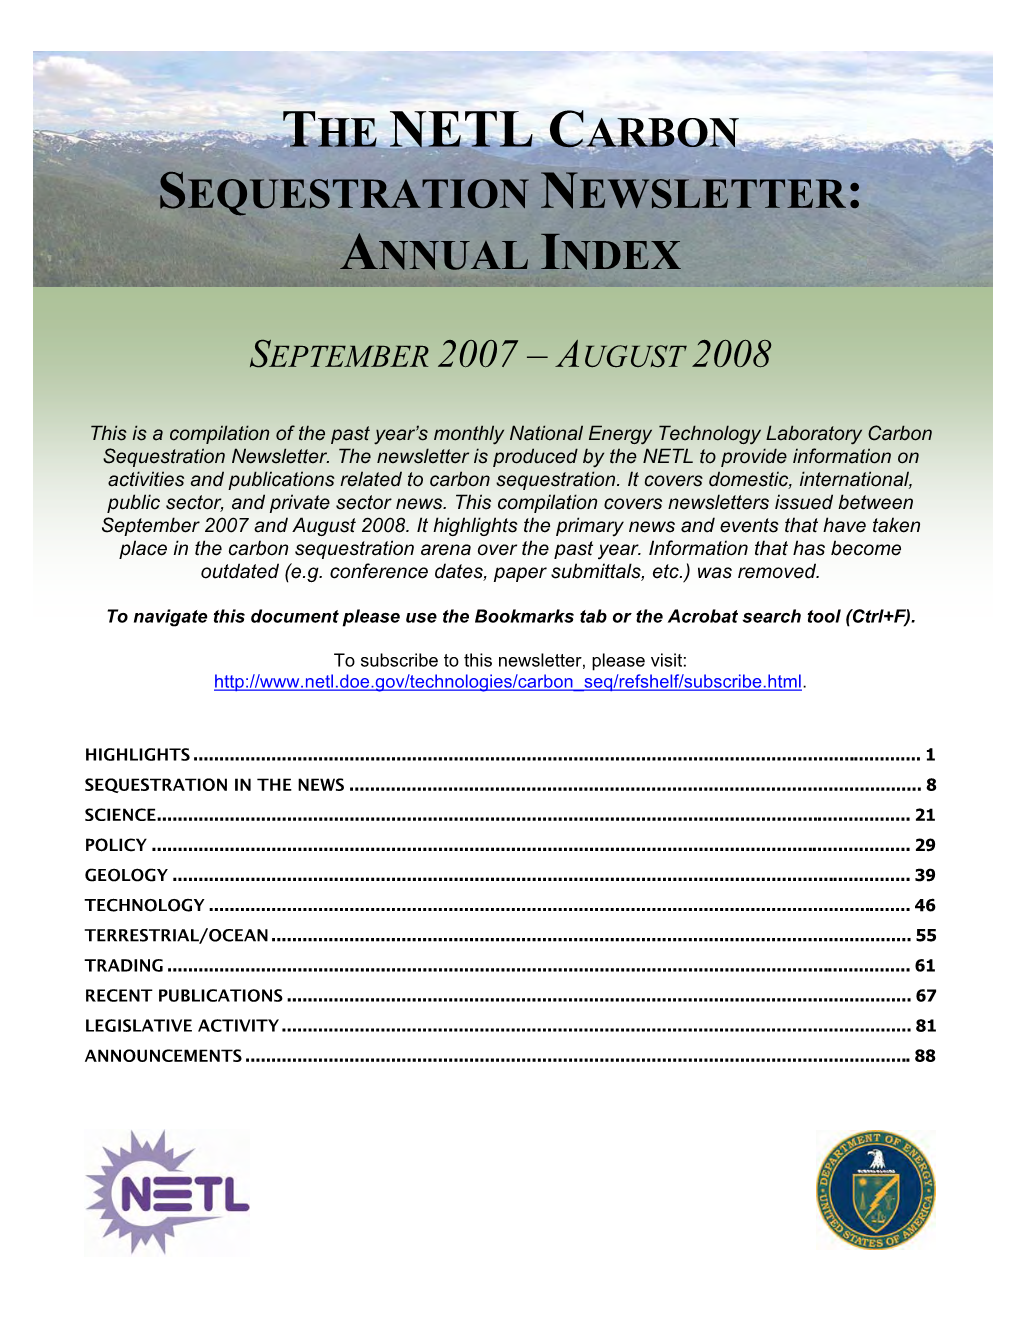 The Netl Carbon Sequestration Newsletter: Annual Index